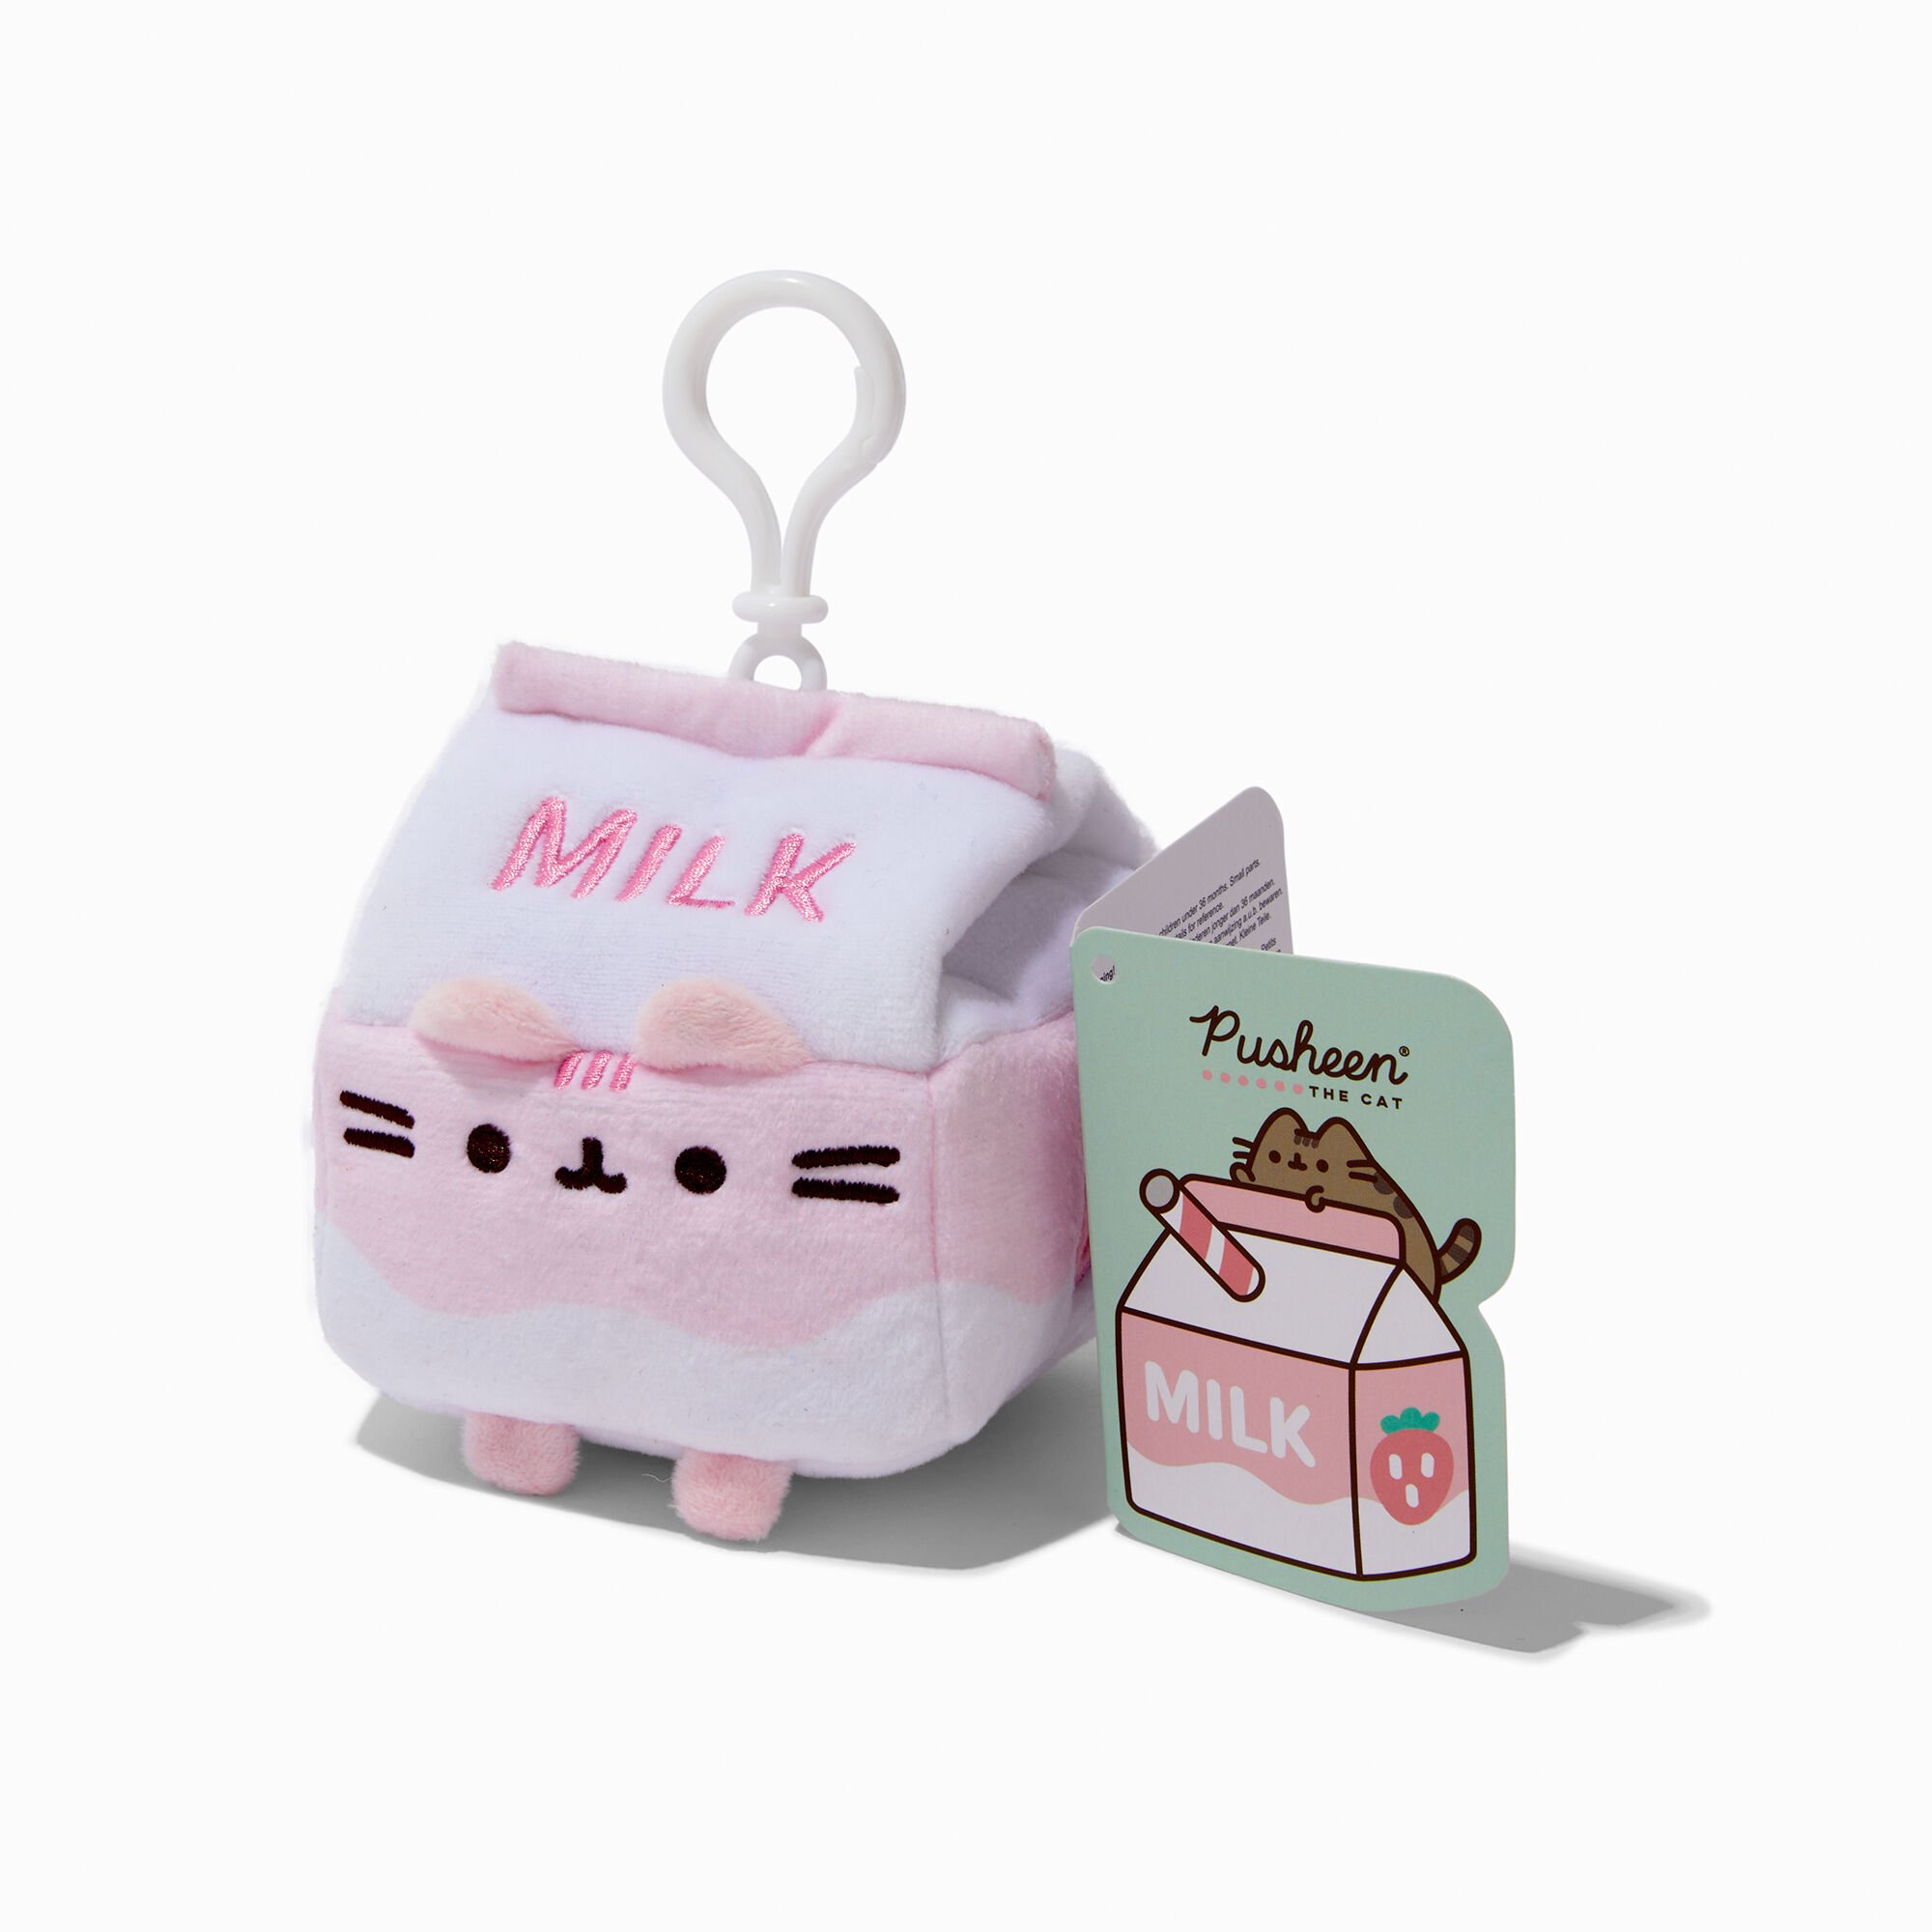 View Claires Pusheen Strawberry Milk Soft Toy Bag Clip information